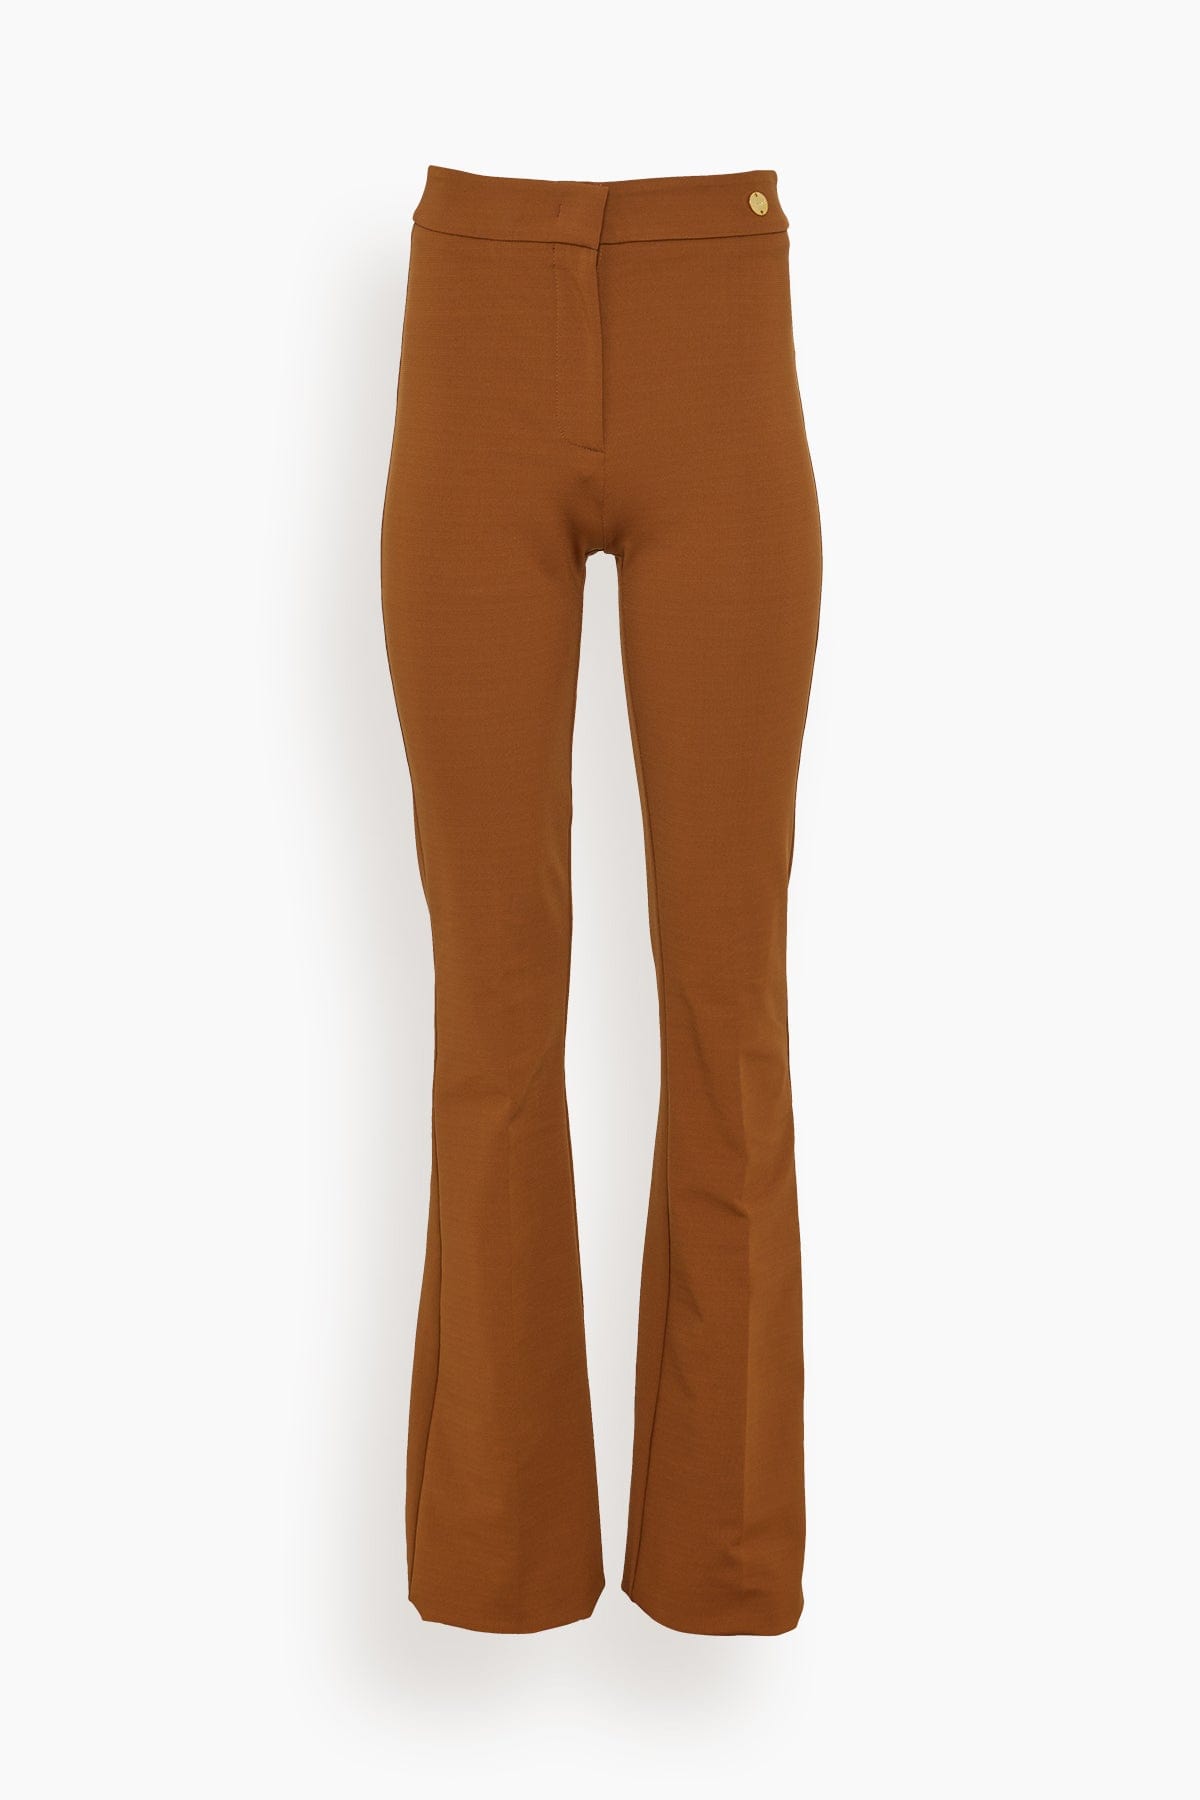 Callas Milano Unclassified Danae Stretch High Waisted Fit and Flare Trouser in Caramel Brown